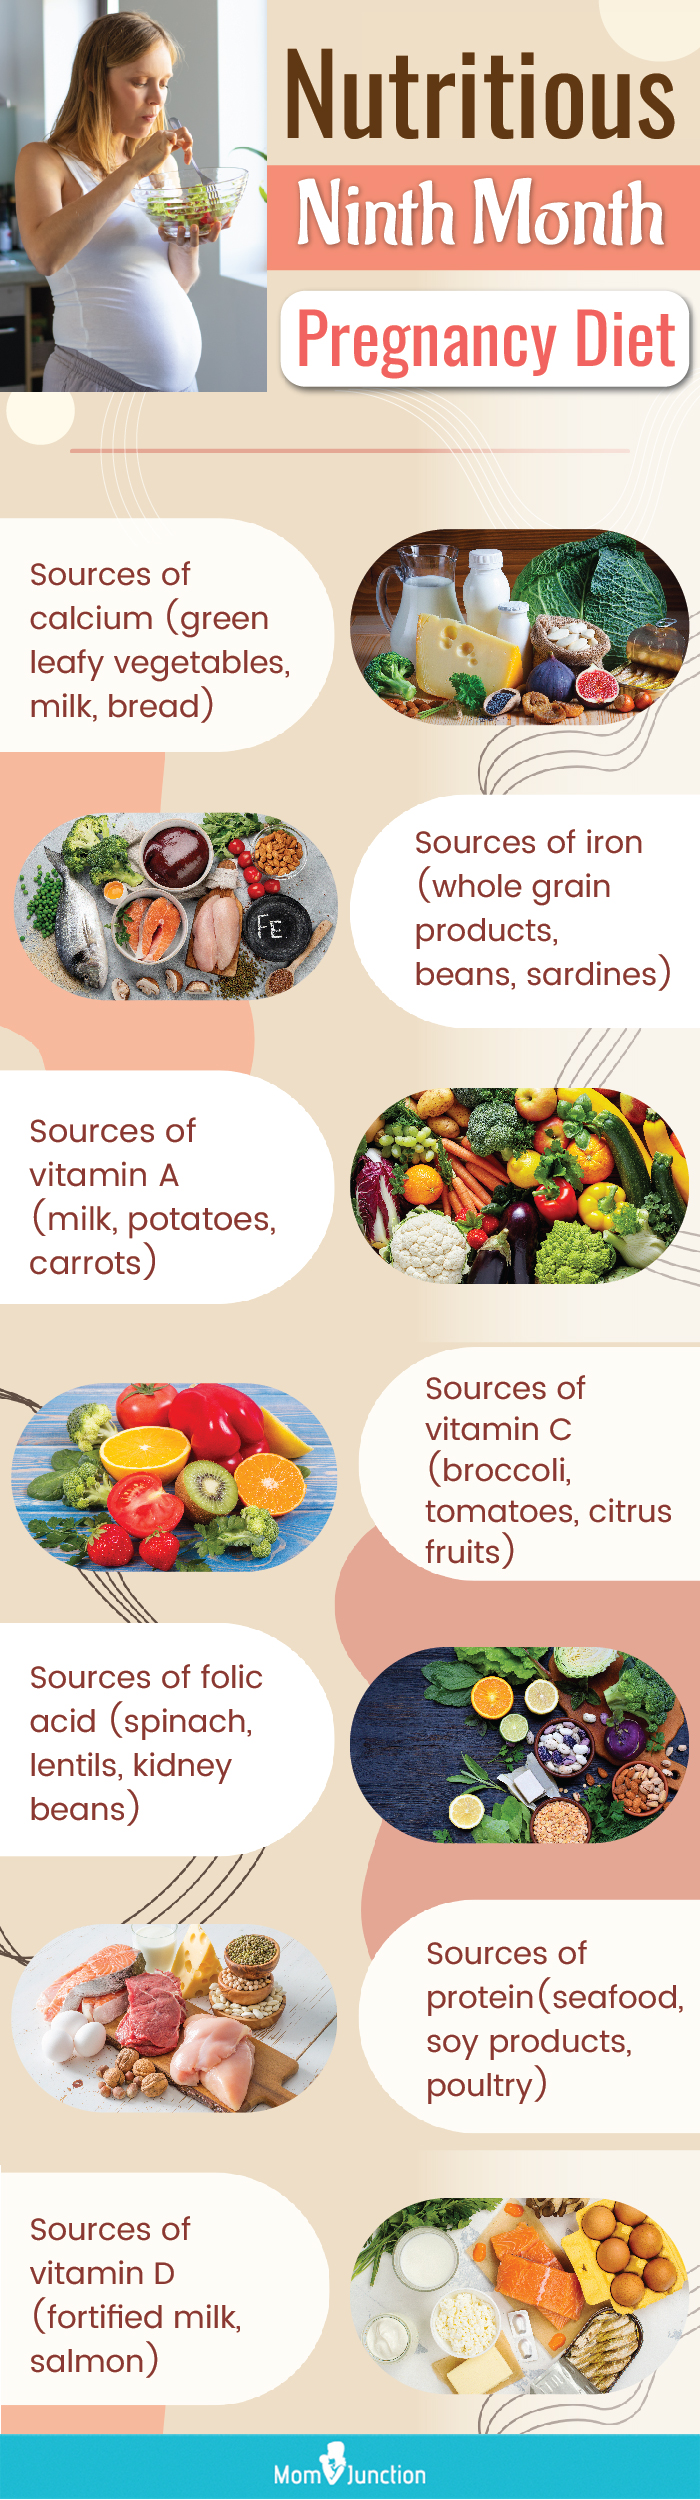 pregnancy diet for the ninth month (infographic)